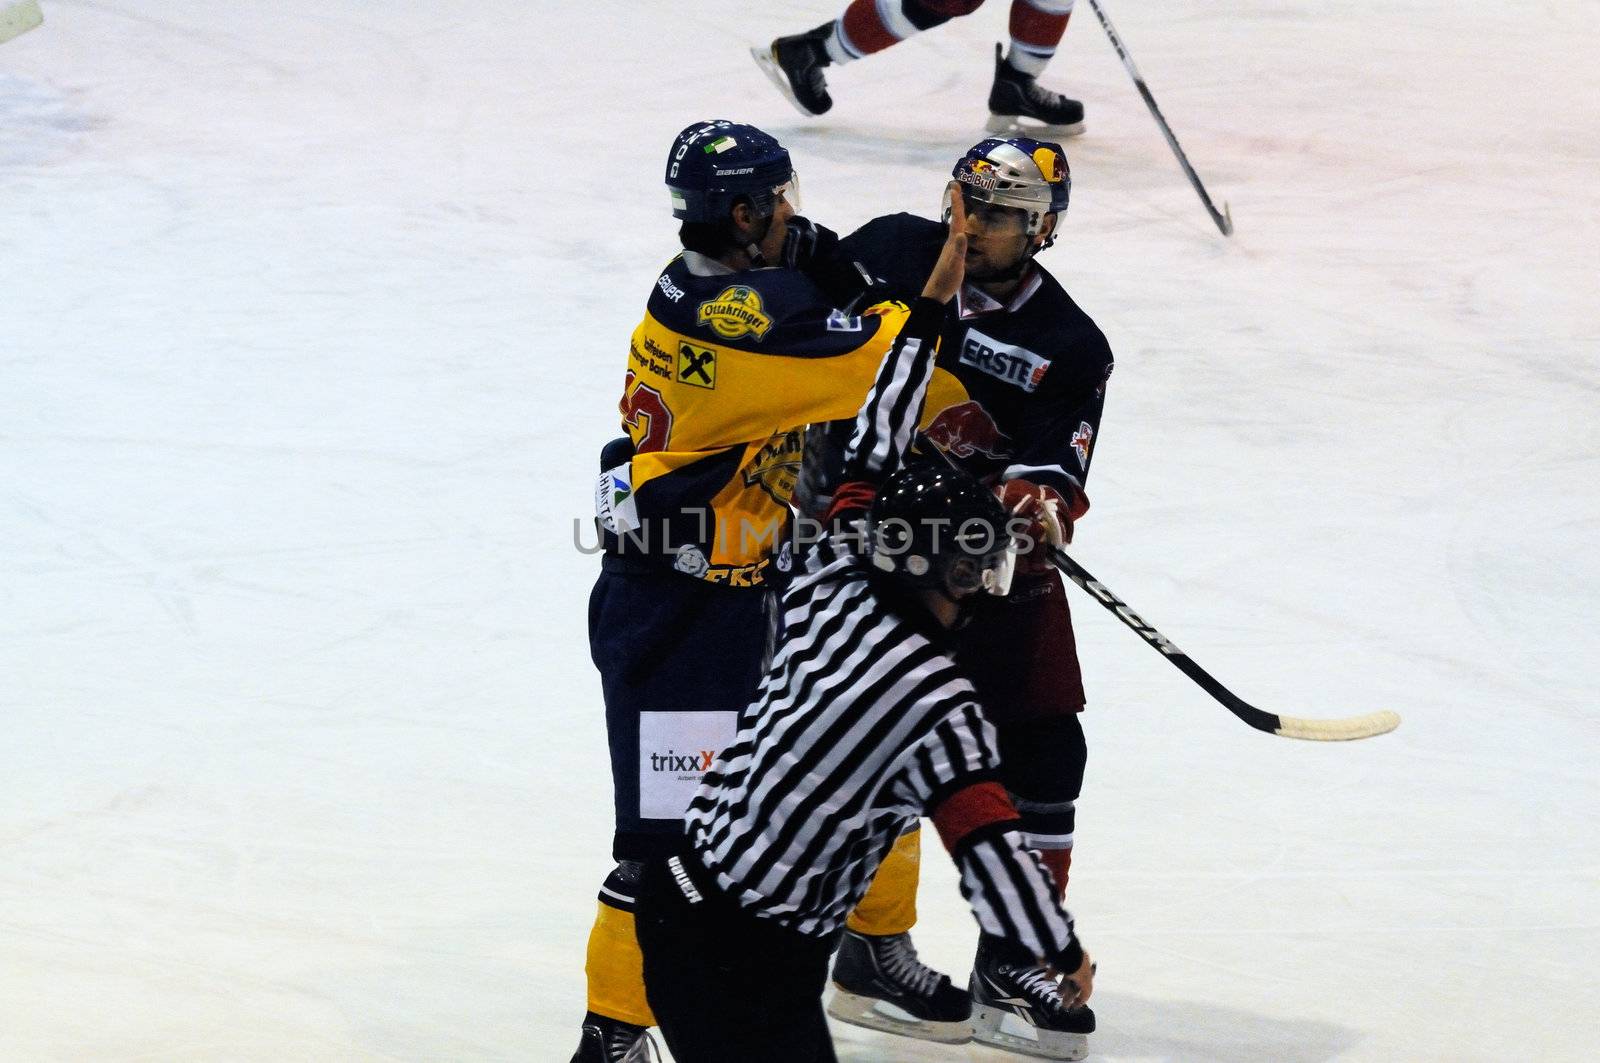 ZELL AM SEE, AUSTRIA - DECEMBER 7: Austrian National League. Referee signaling a penalty as things get nasty. Game EK Zell am See vs. Red Bulls Salzburg (Result 4-6) on December 7, 2010, at hockey rink of Zell am See